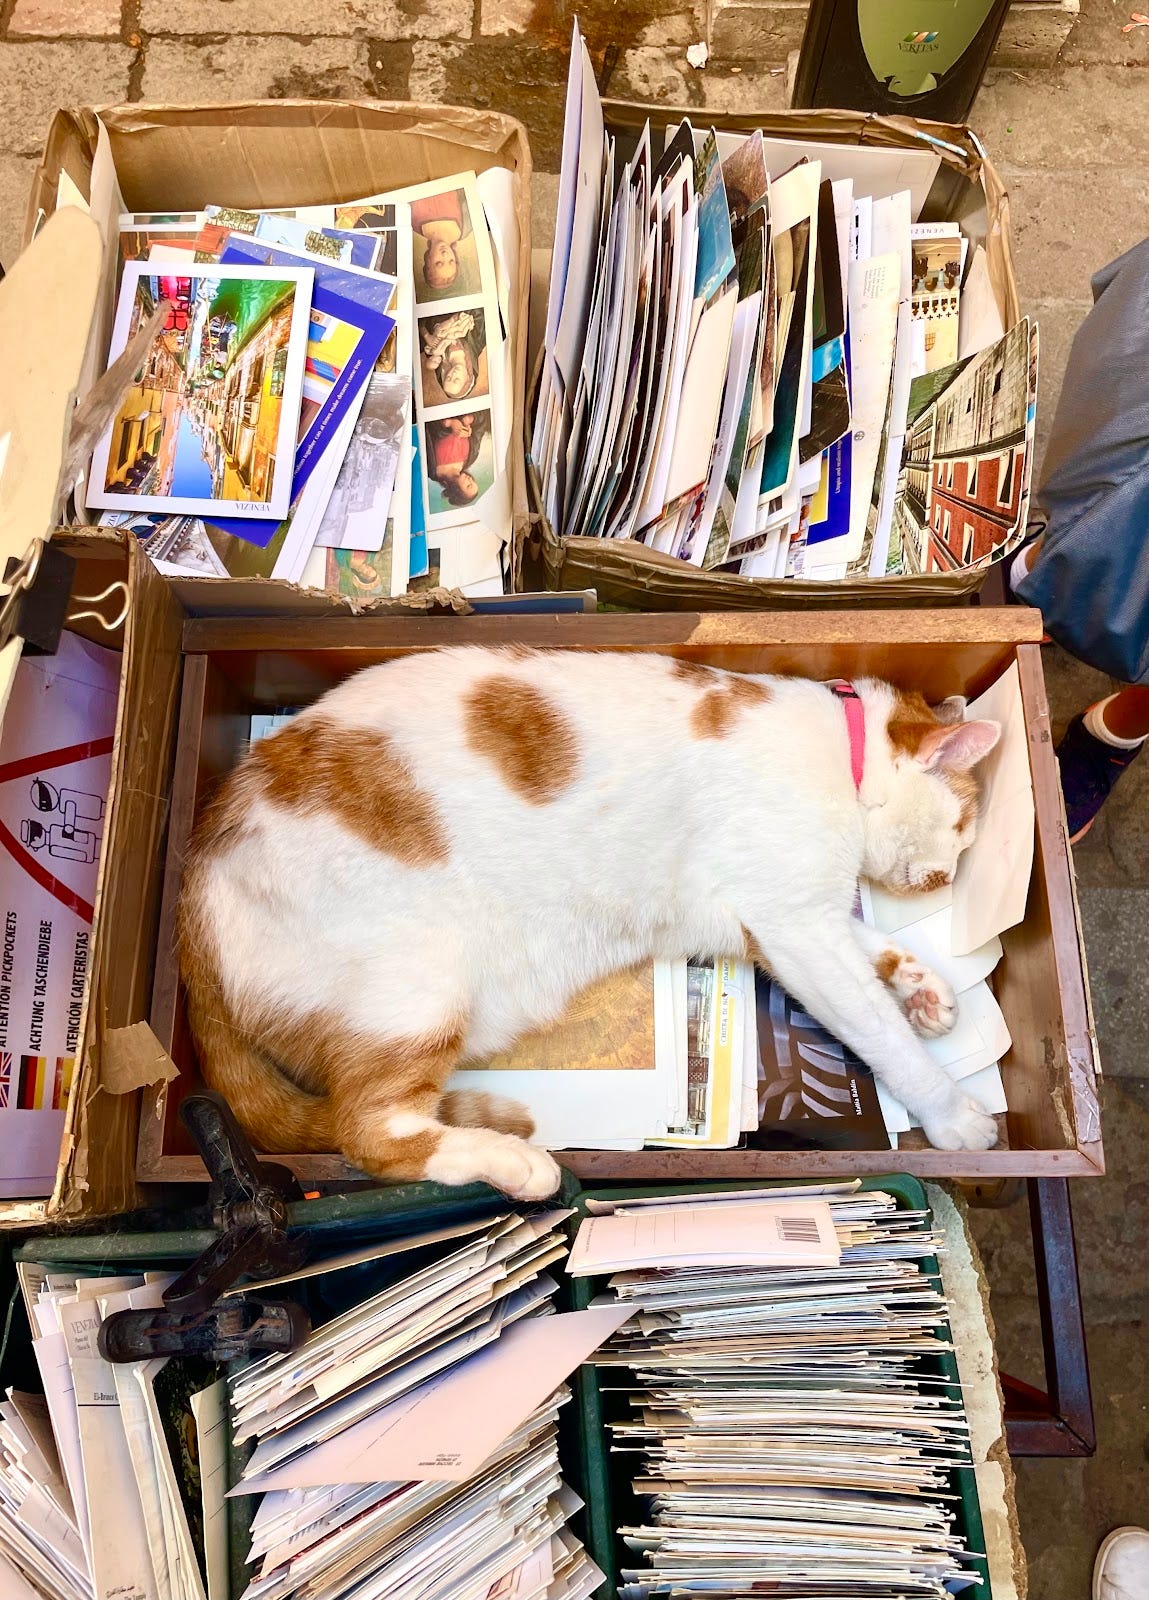 Venice, Italy, July 2022, a cat is sleeping between boxes of postcards